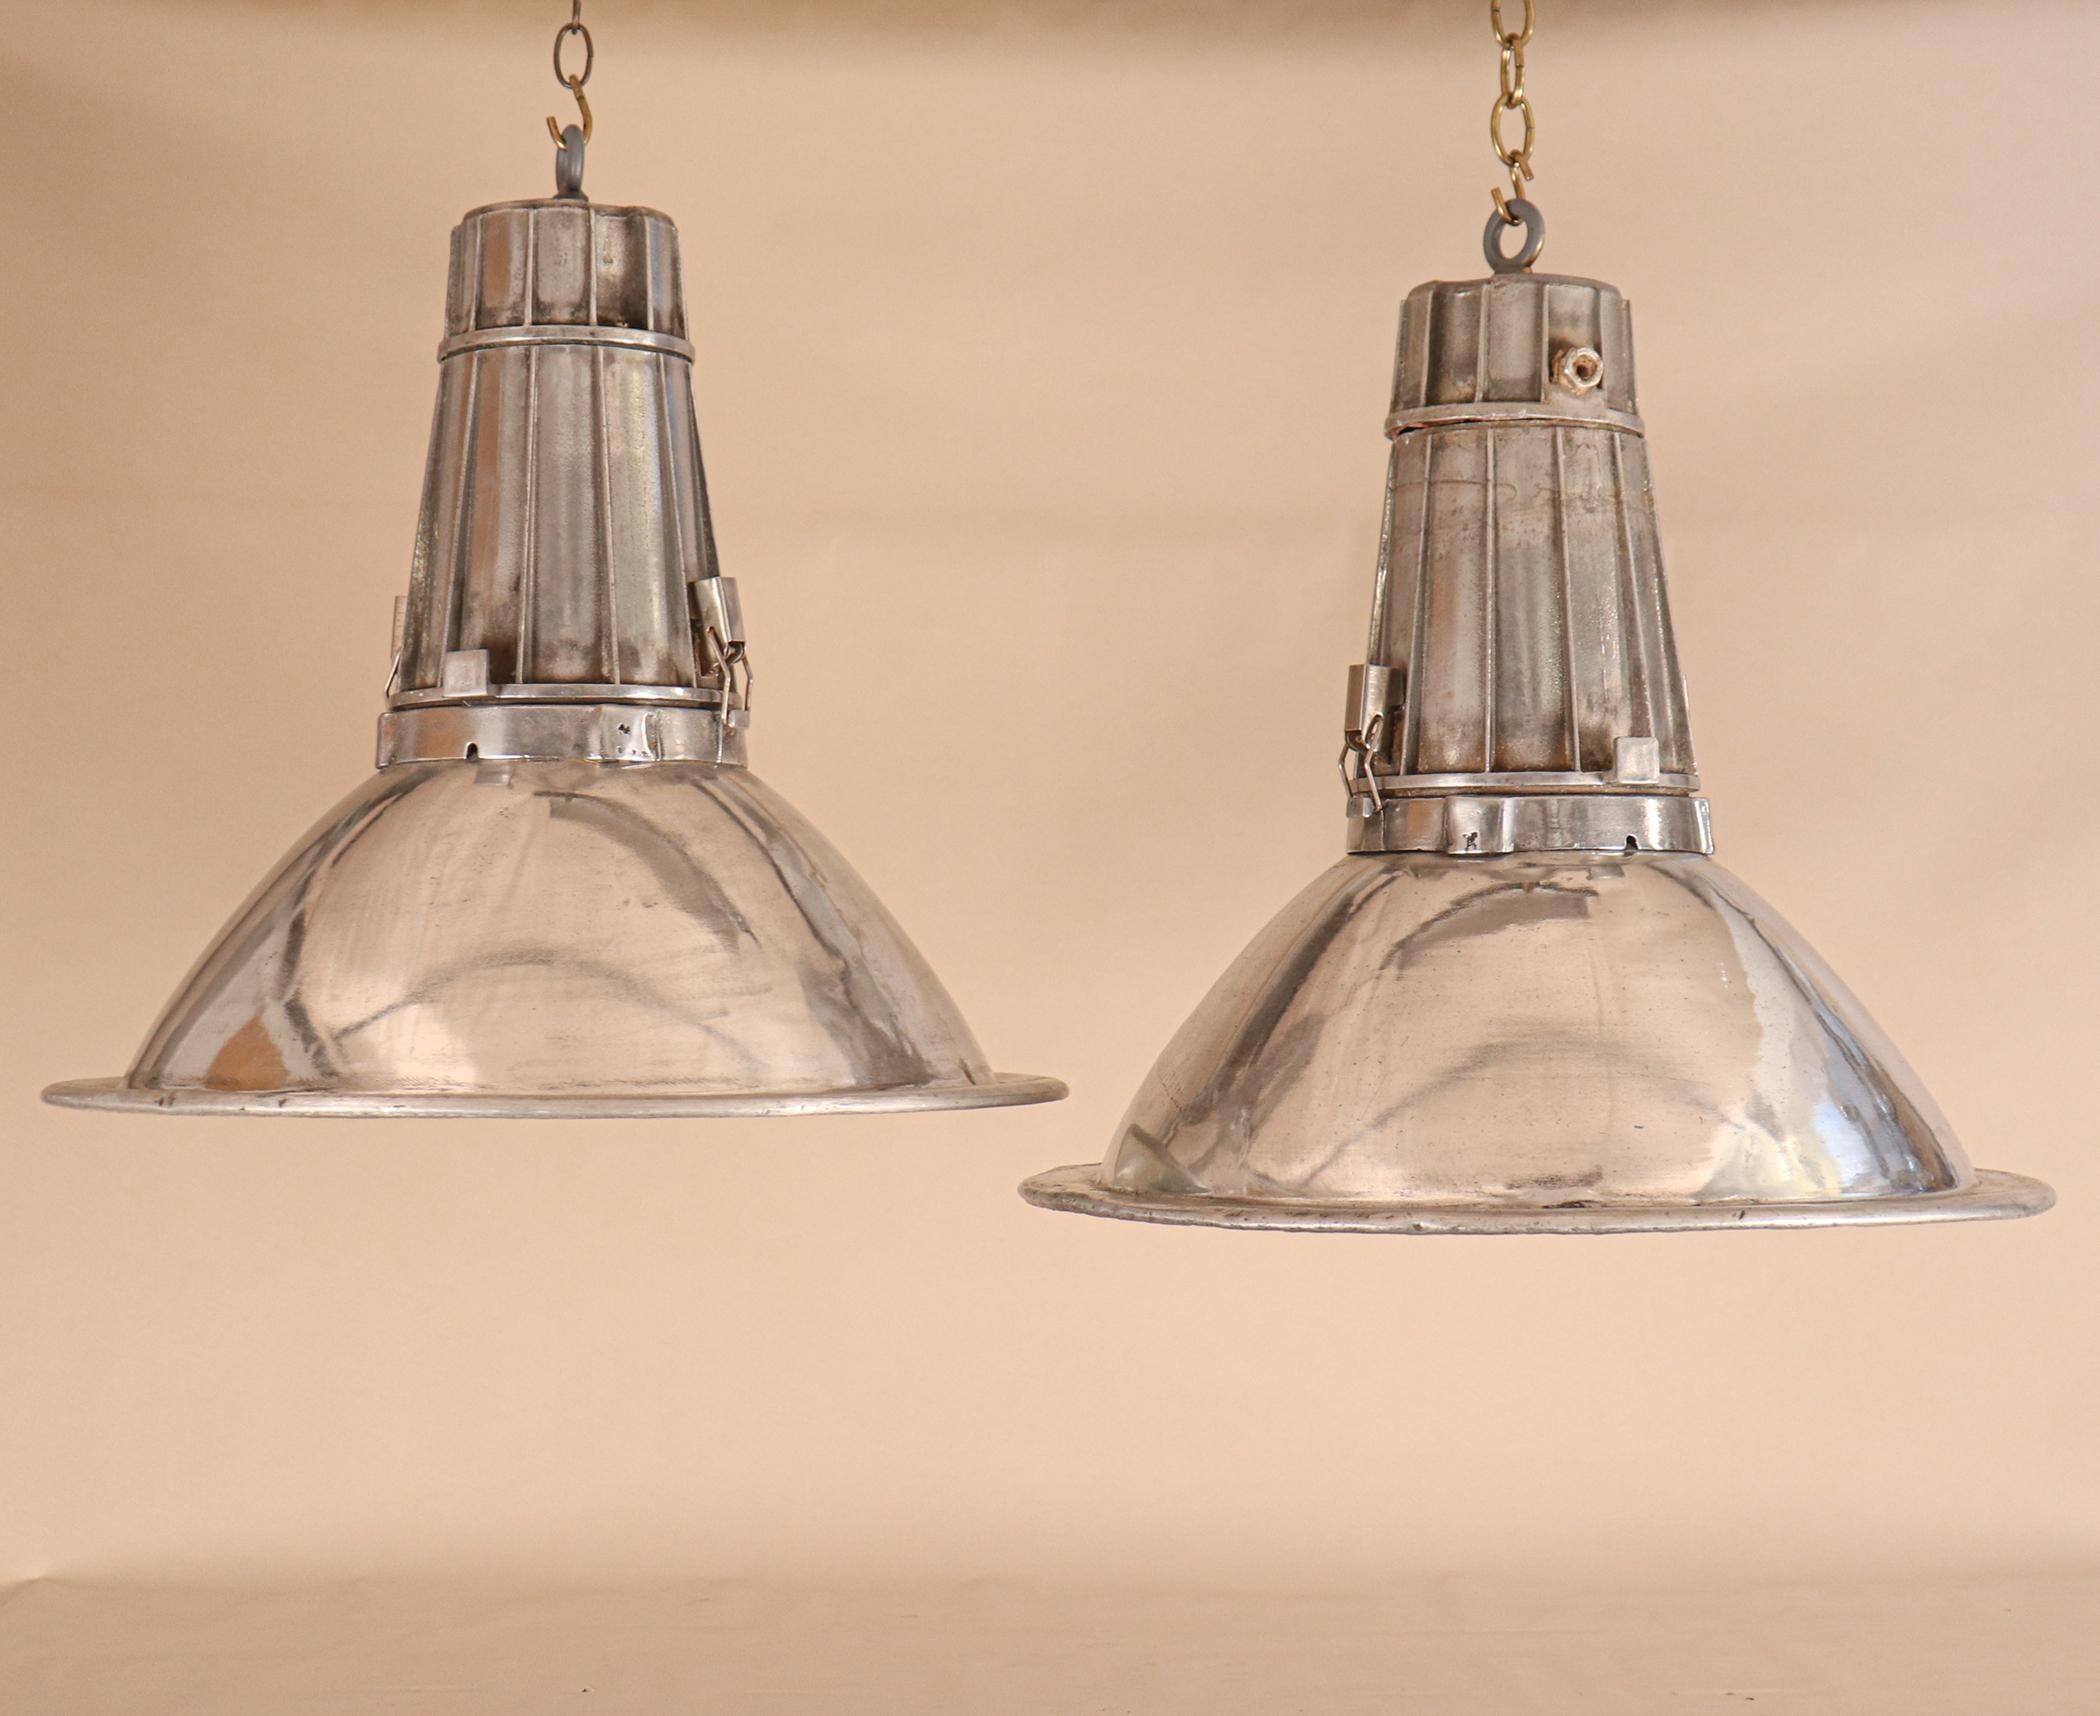 A very cool pair of aluminum industrial pendant lights, circa 1960. These midcentury floodlights have a clean, sleek form and an impactful size. They have been newly re-wired with porcelain sockets and the reflectors/lenses unclip to change a